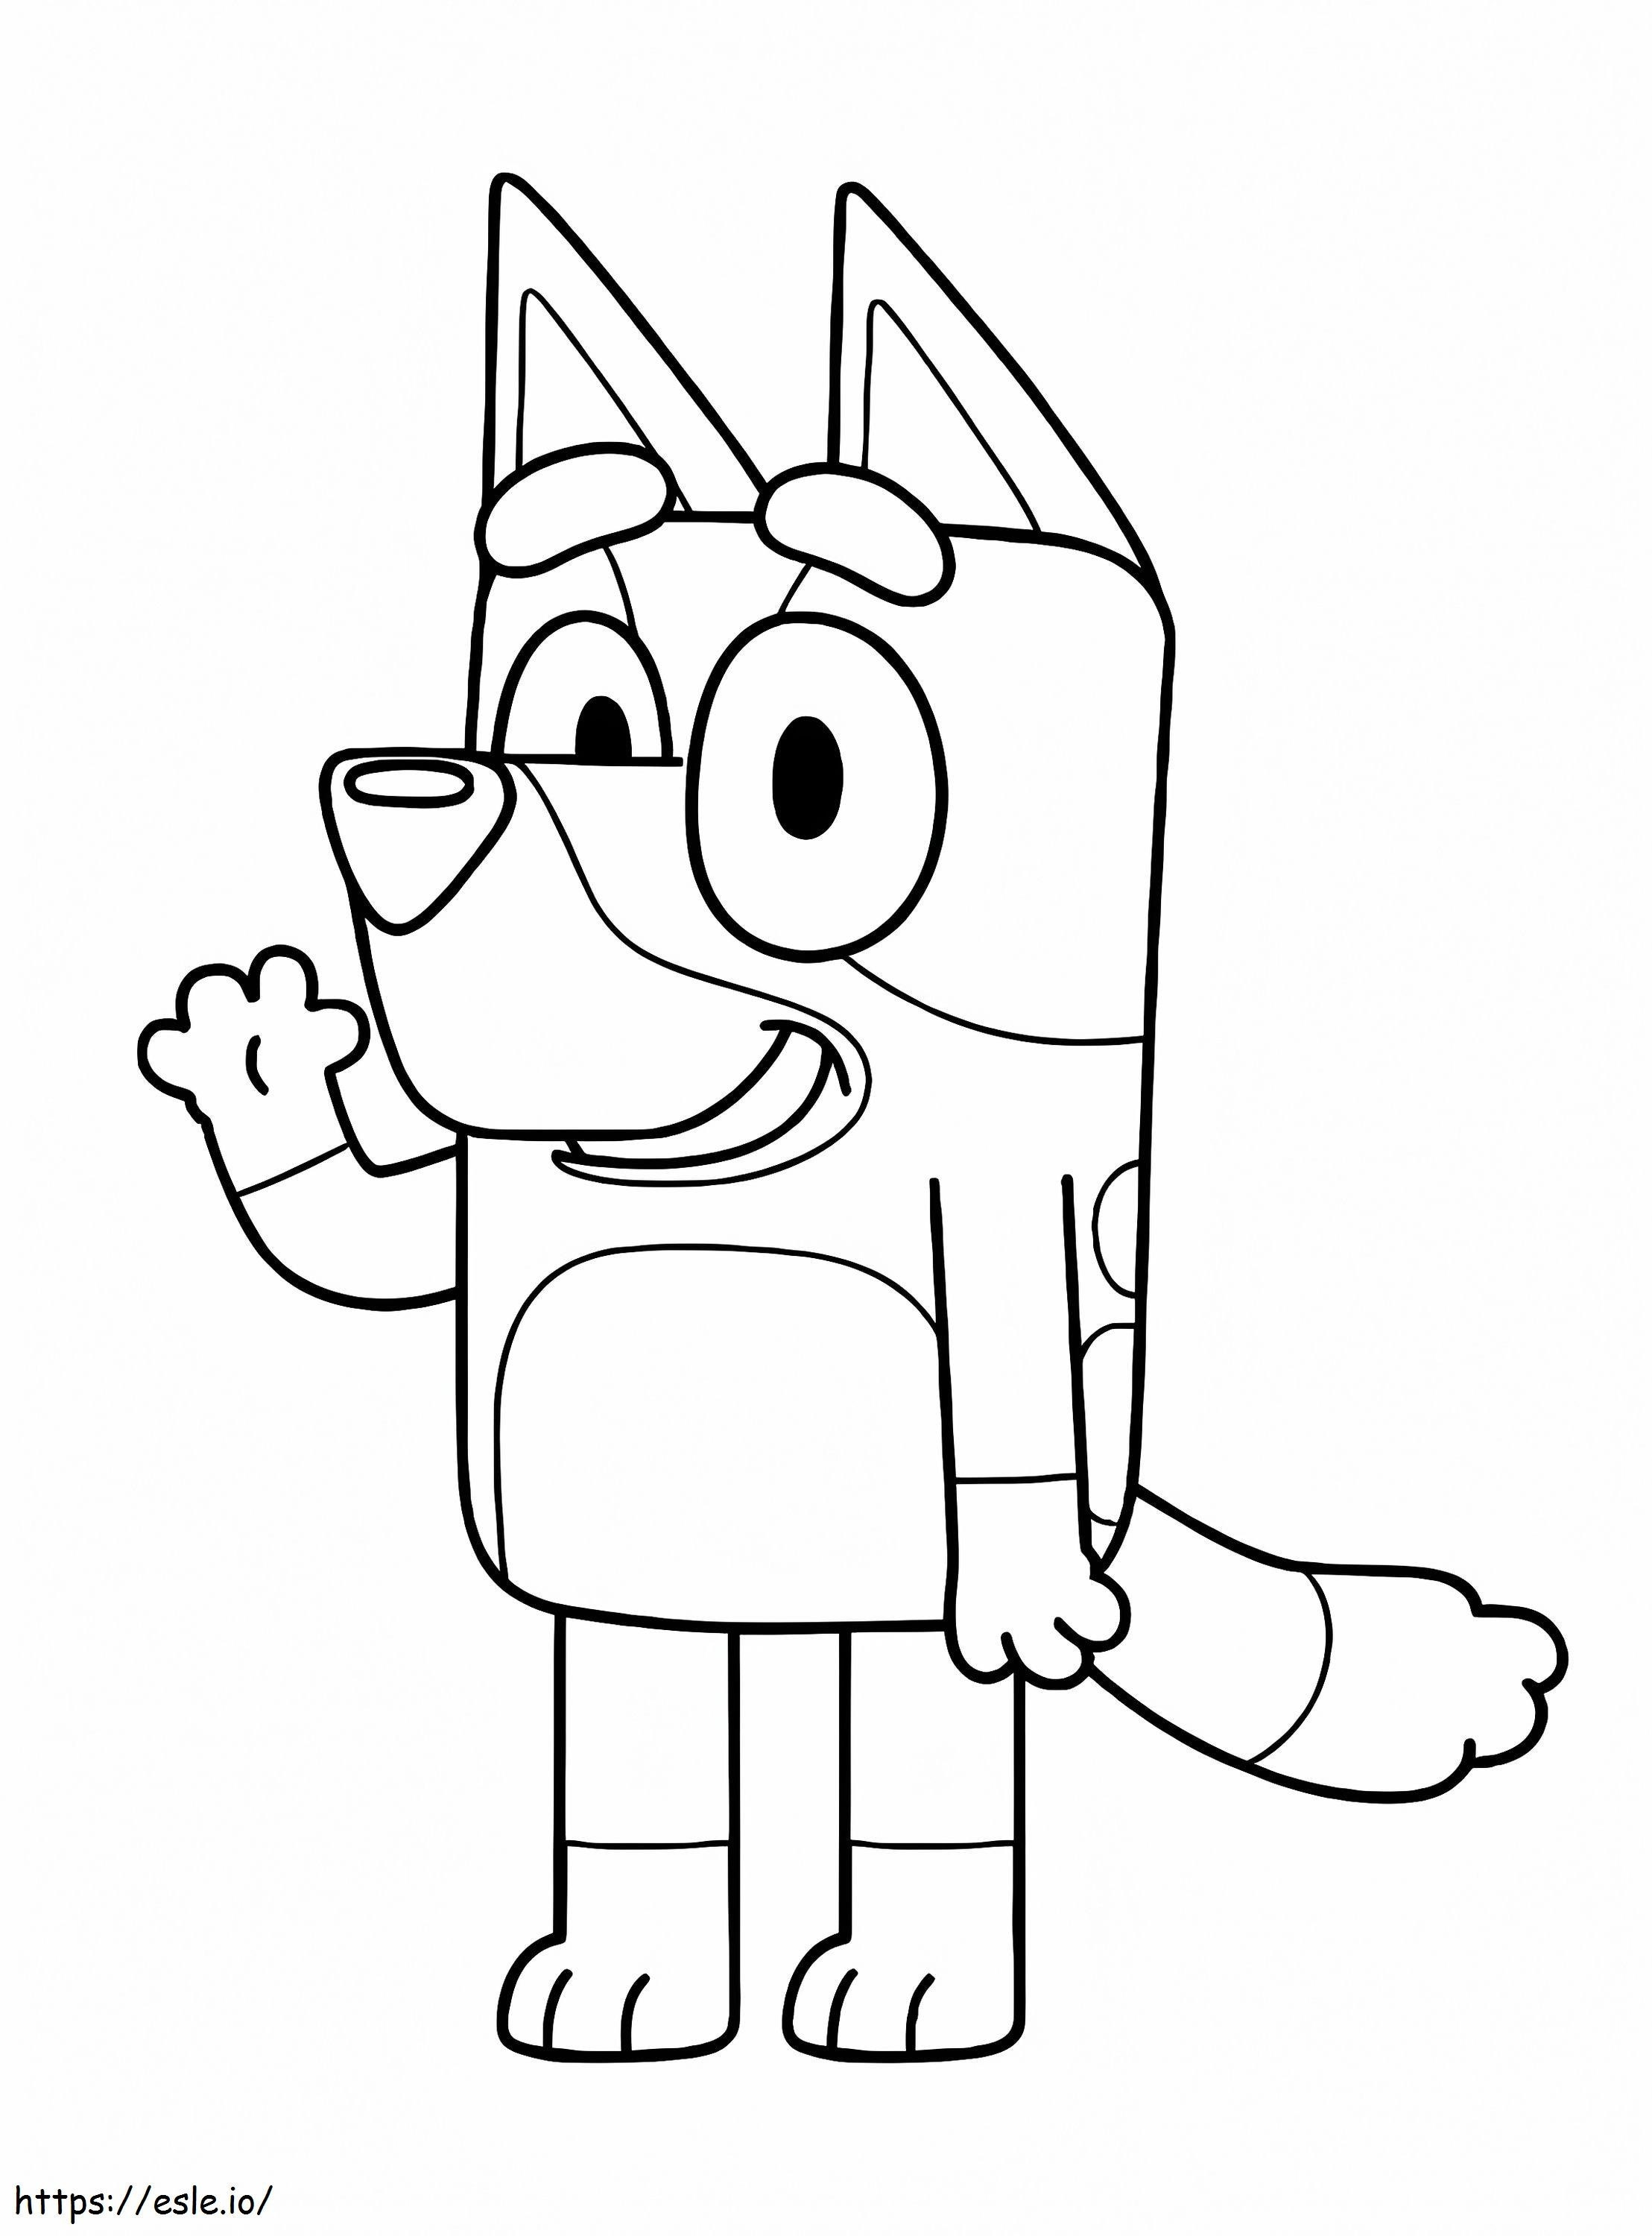 Bluey 021 coloring page